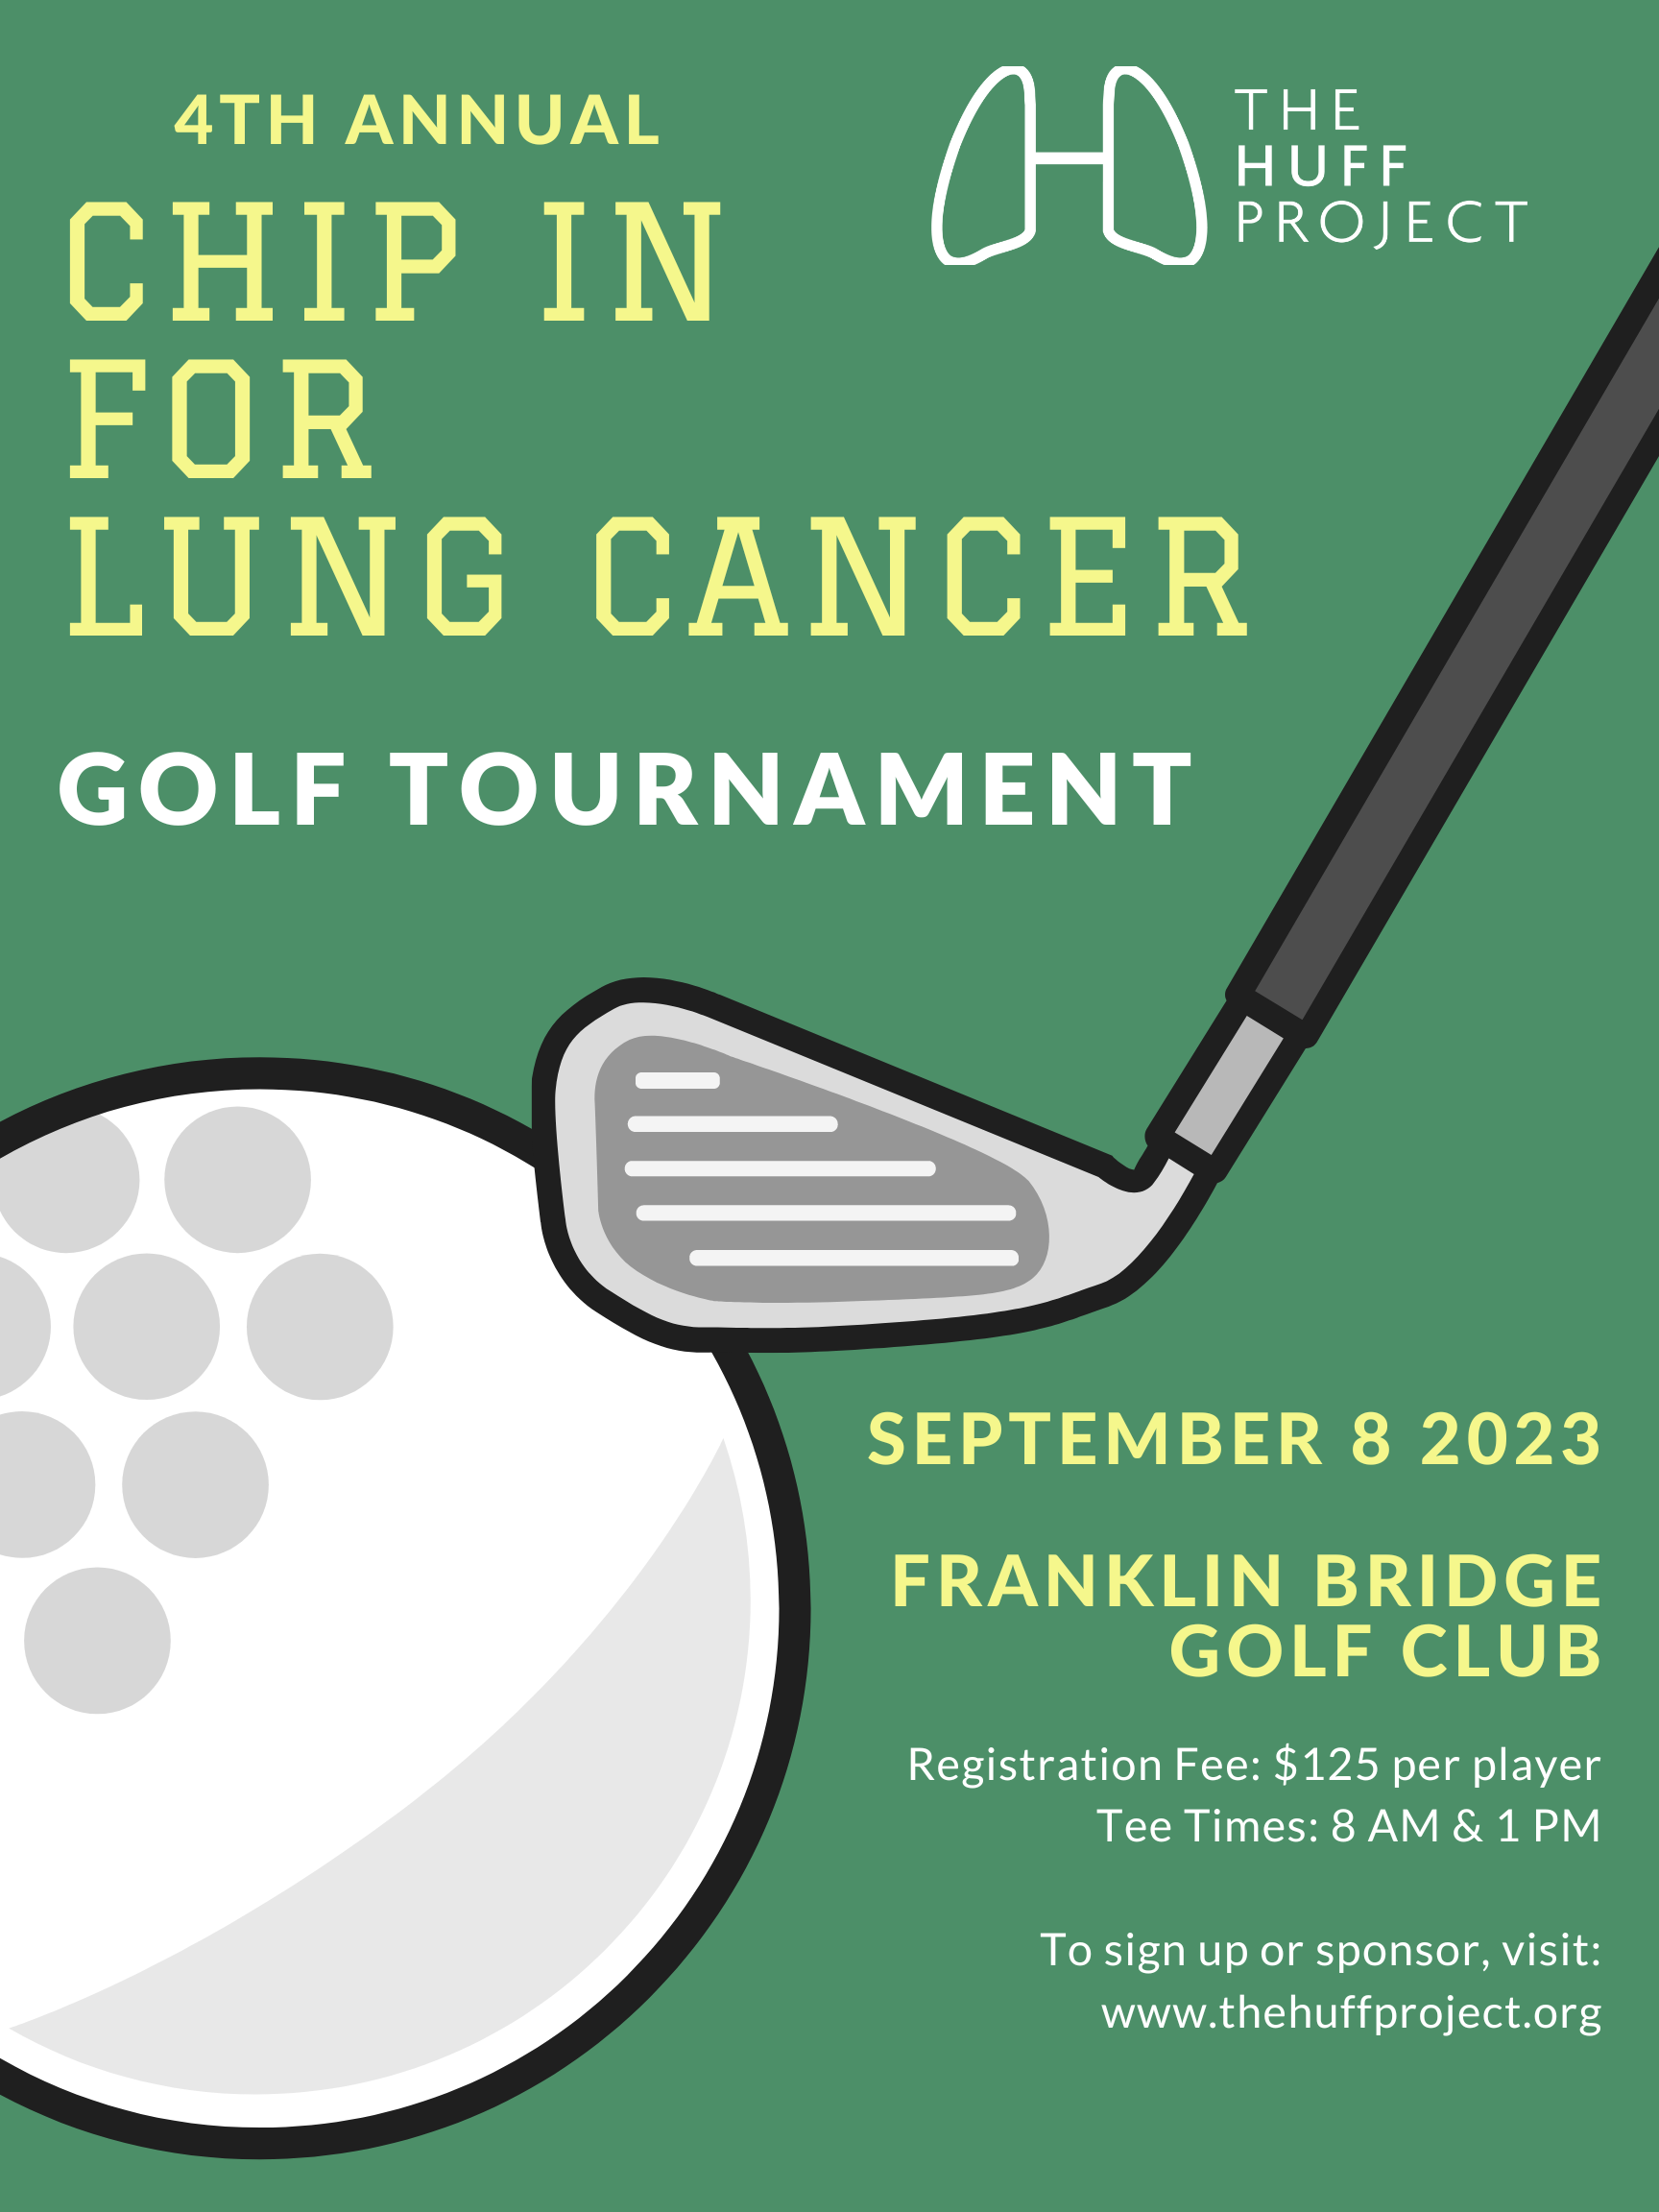 4th Annual Chip in for Lung Cancer Golf Tournament